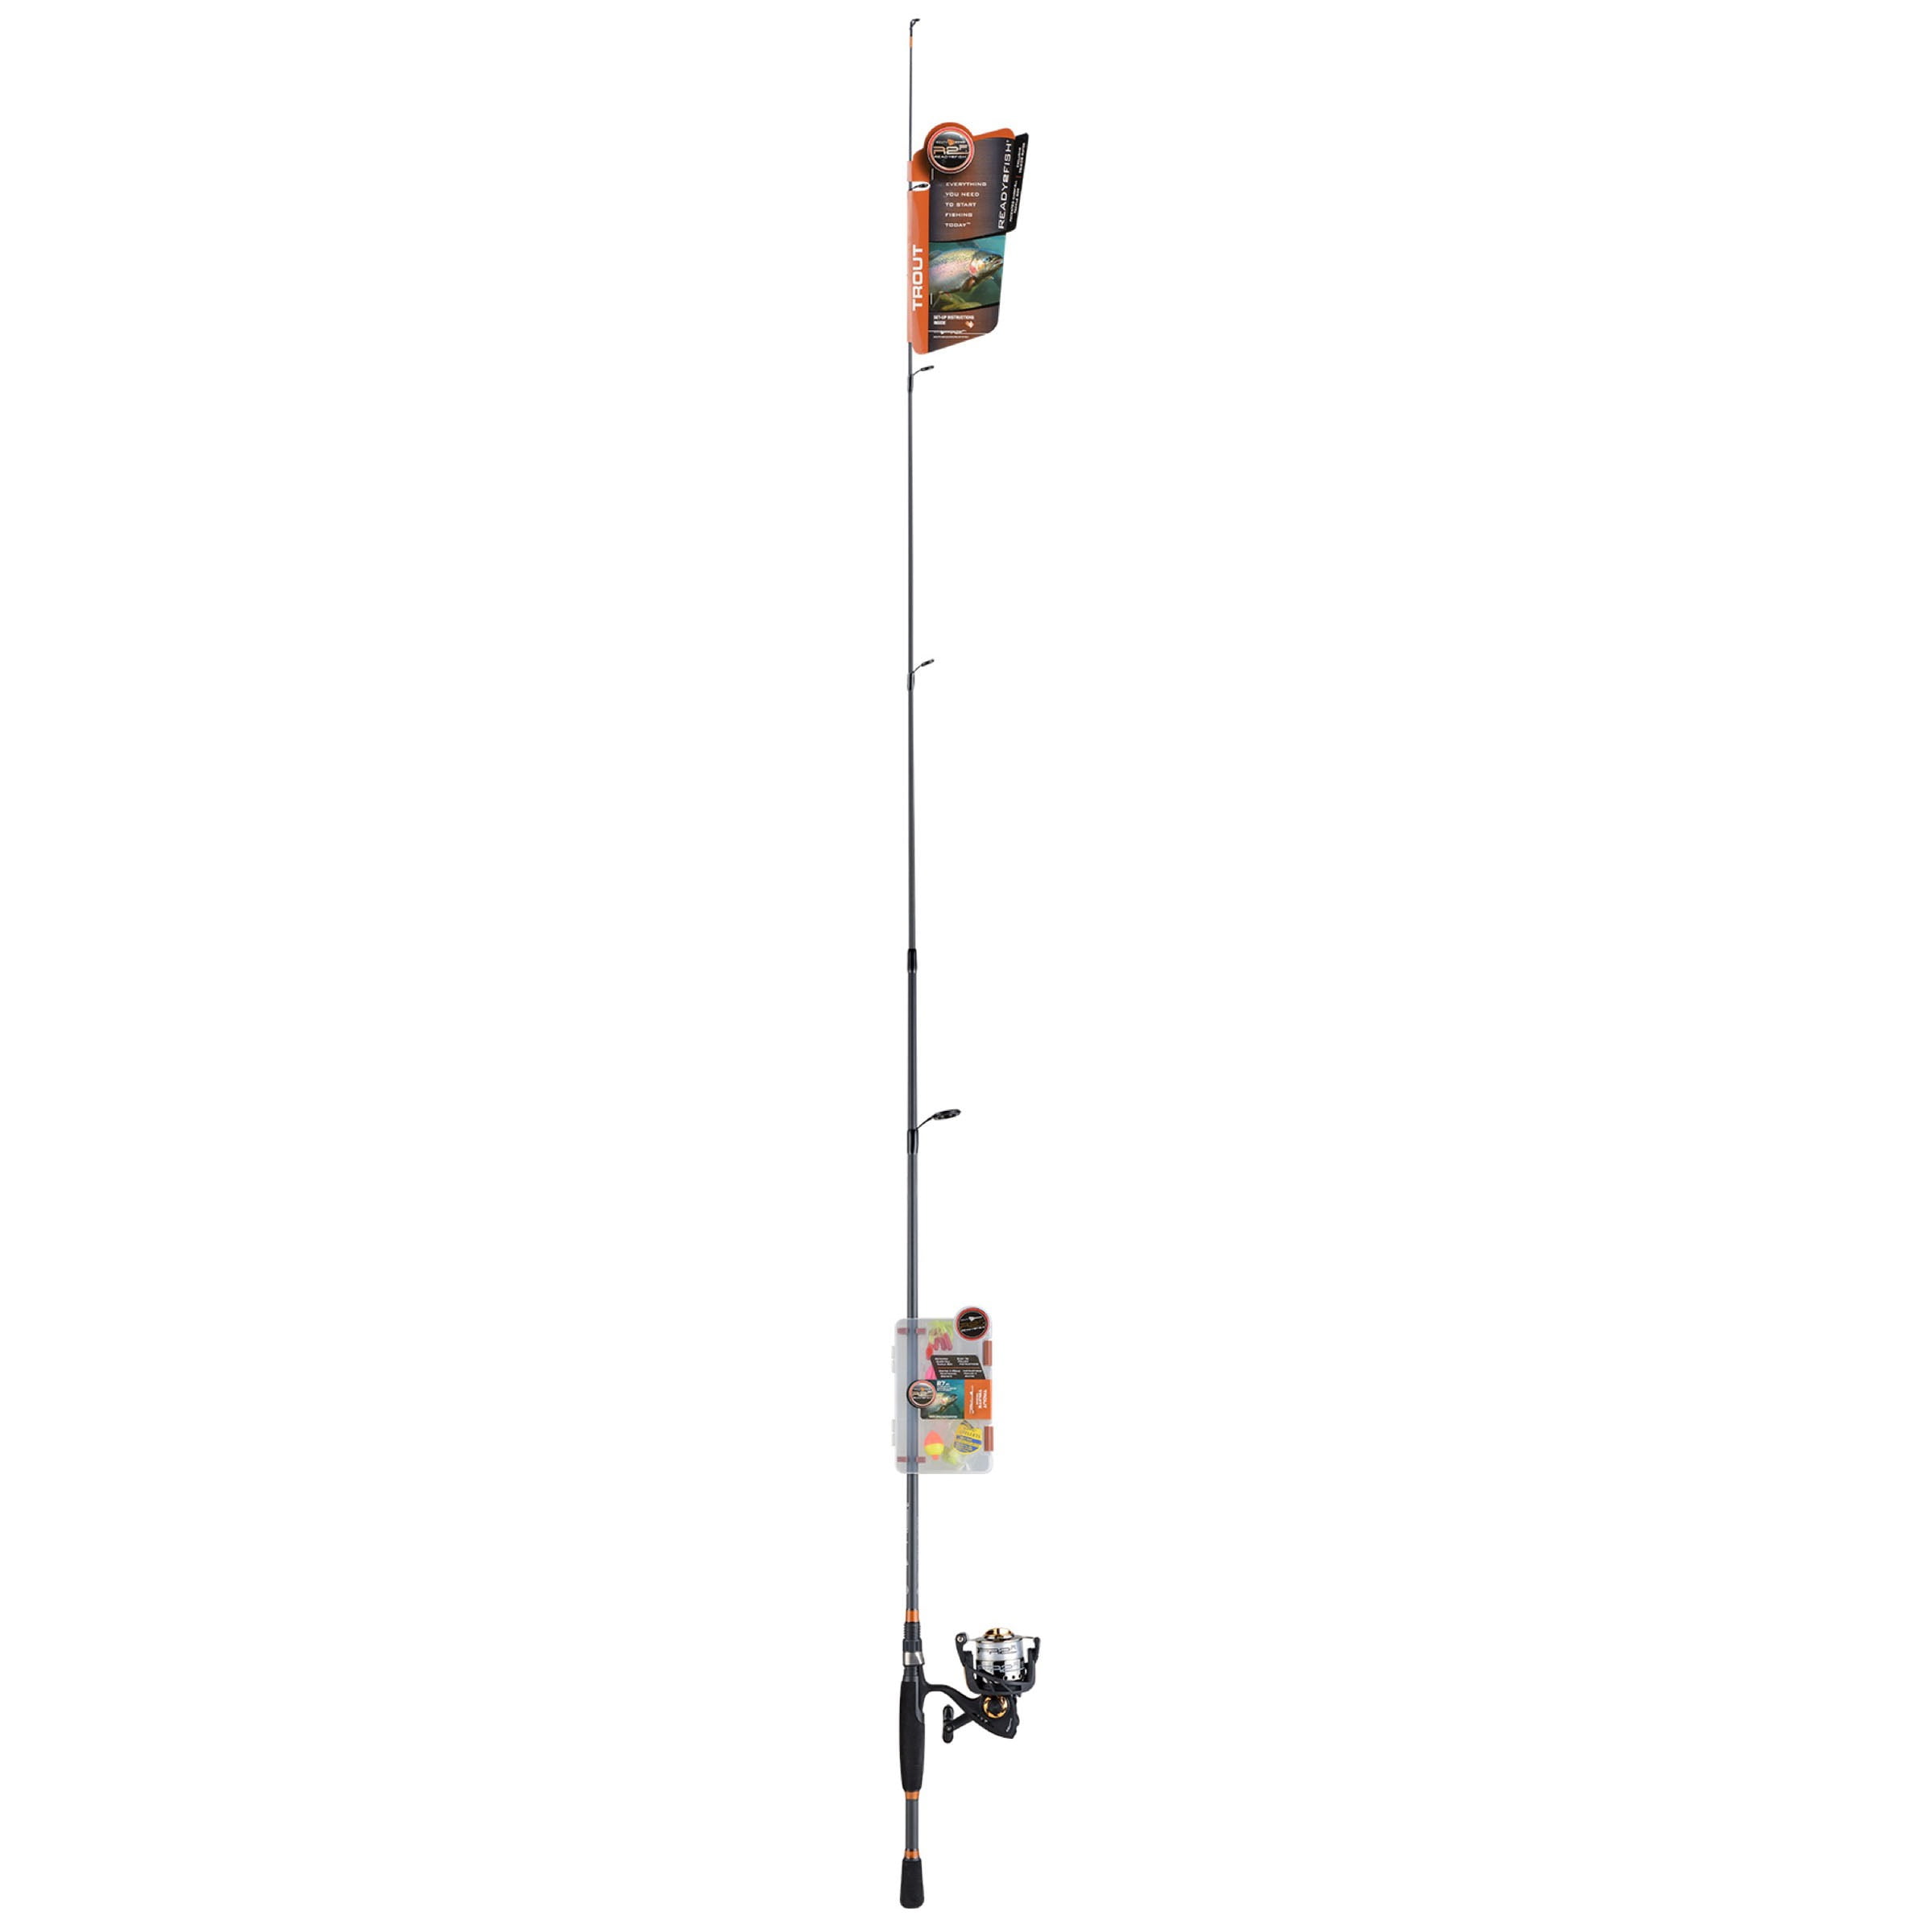 new to fishing, is the south bend r2f a good rod to start with? i don't  know much about fishing or fishing poles lol, any advice is appreciated  also! : r/FishingForBeginners